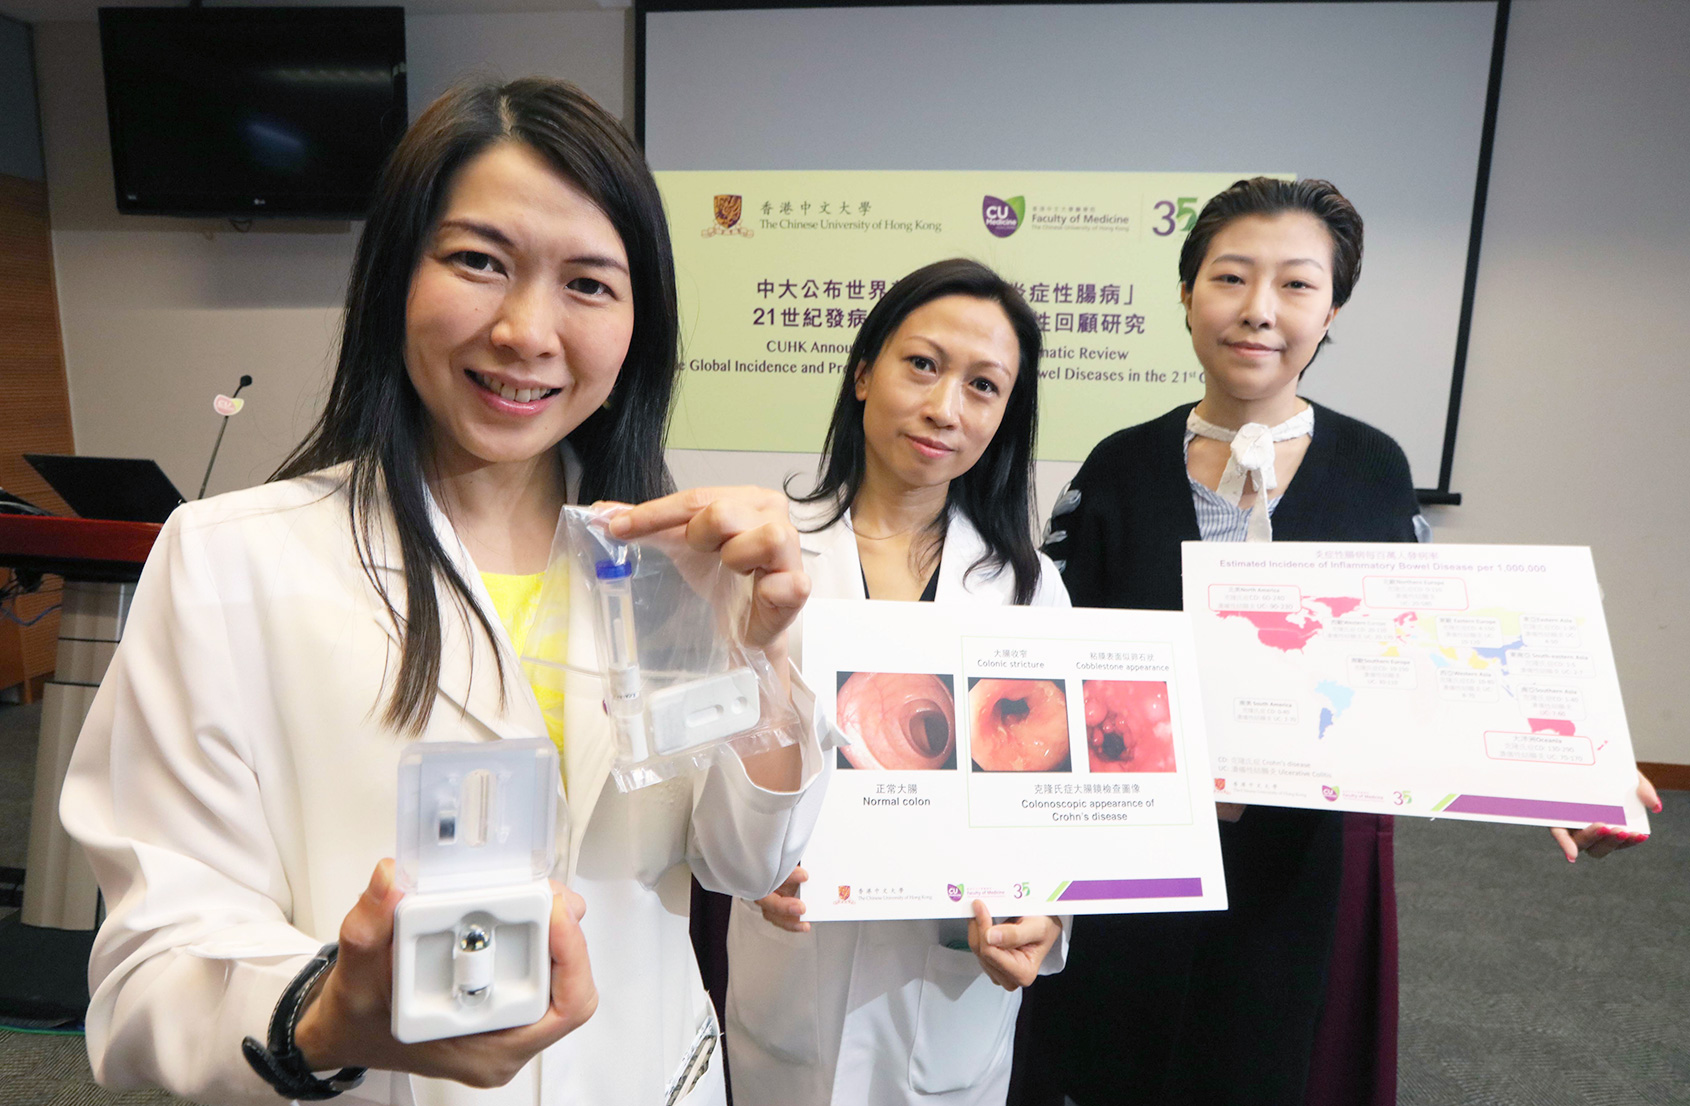 (From left) Prof. Siew NG and Chief Nursing Officer Ms Jessica CHING from the Department of Medicine and Therapeutics, Faculty of Medicine at CUHK, and the IBD patient Miss SUM